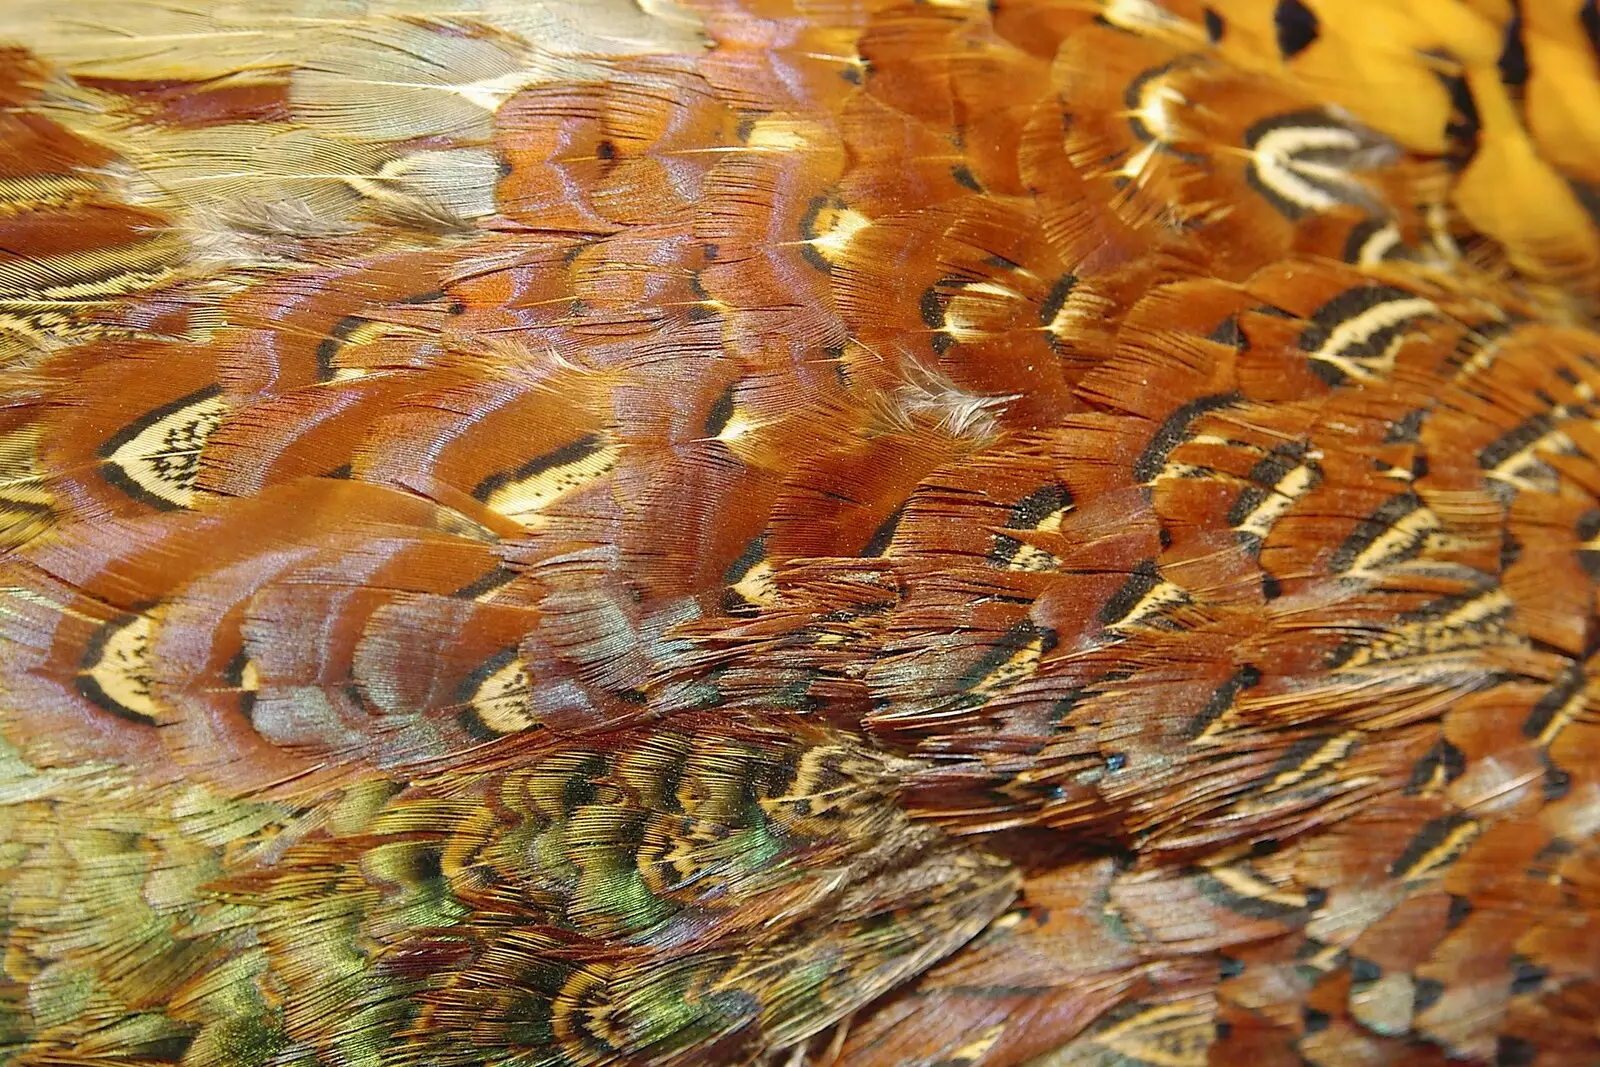 Studies of Pheasant plumage, from Pheasants, Sunsets and The BBs at Bressingham, Norfolk - 11th December 2005